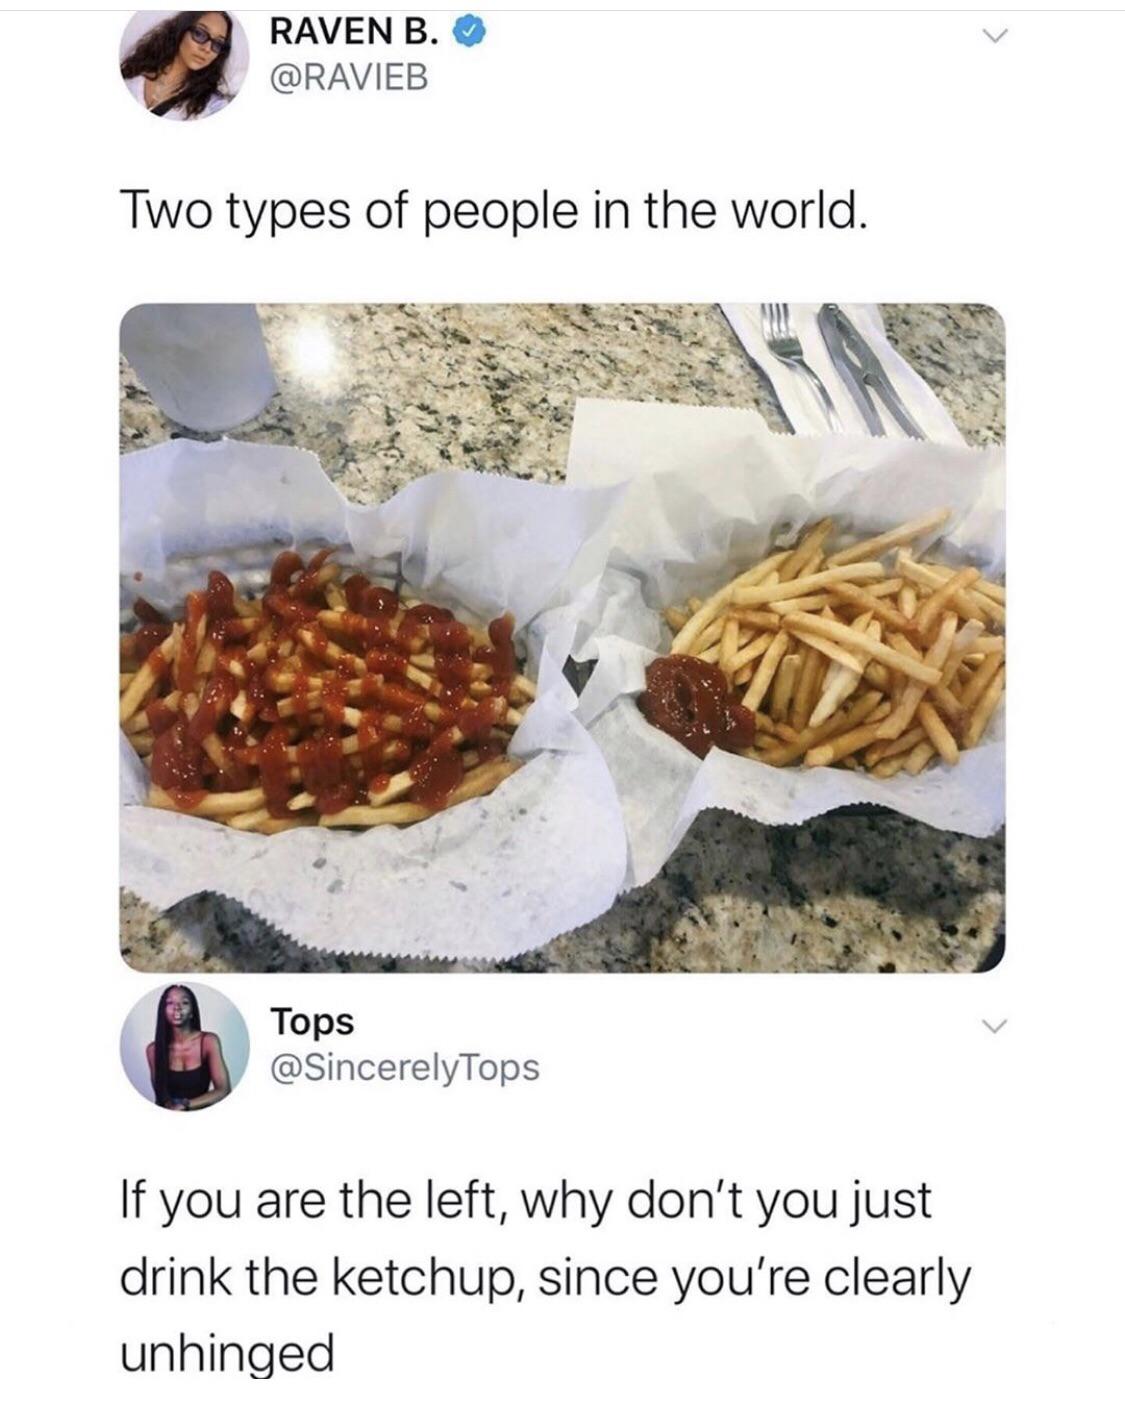 dank memes - ketchup on fries meme - Raven B. Two types of people in the world. Tops Tops If you are the left, why don't you just drink the ketchup, since you're clearly unhinged